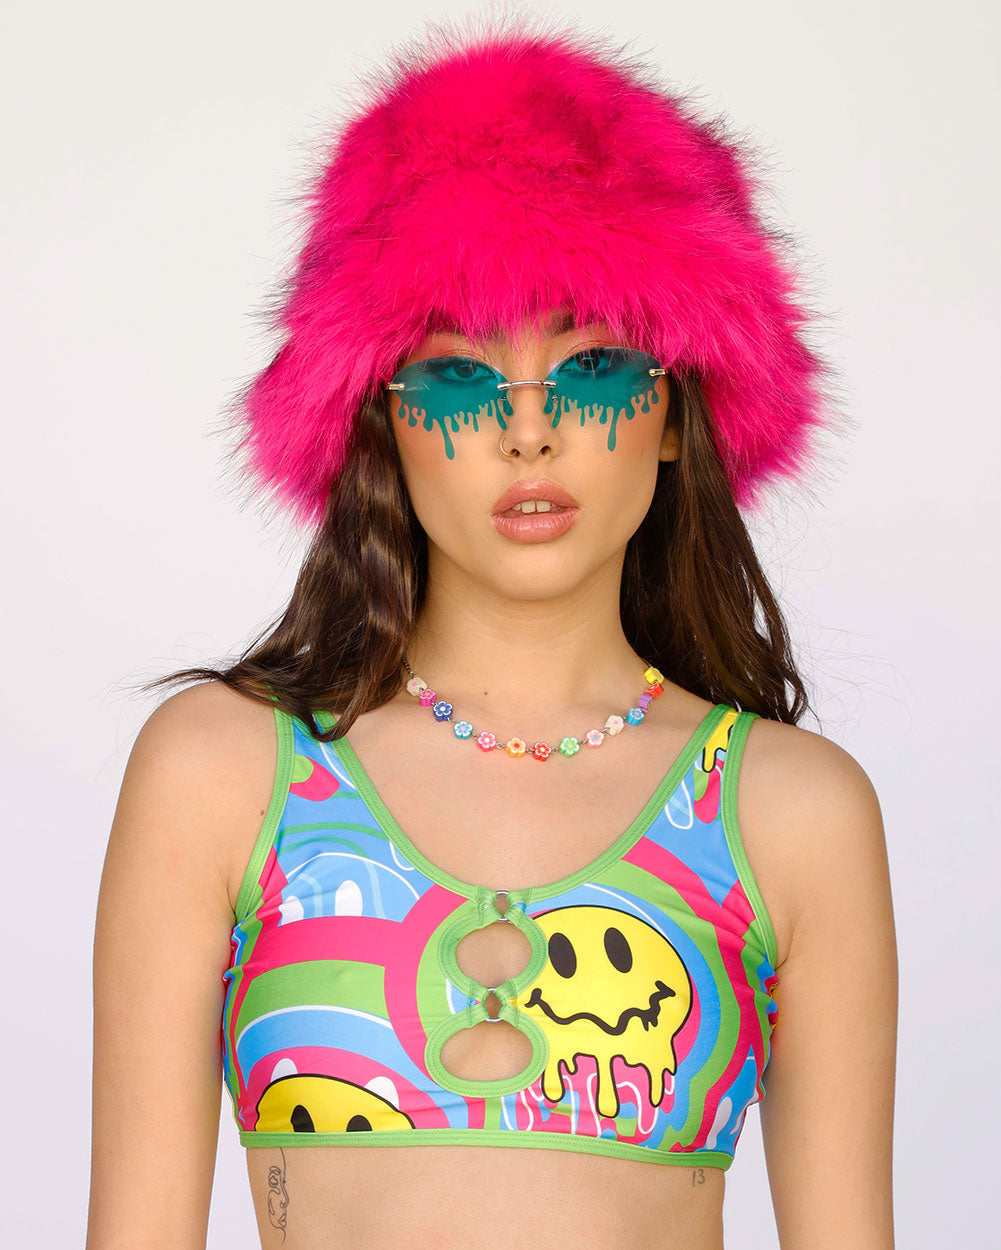 Trippy Time Acid Smiley Bra Top-Blue/Green/Pink-Front--Bethany---S